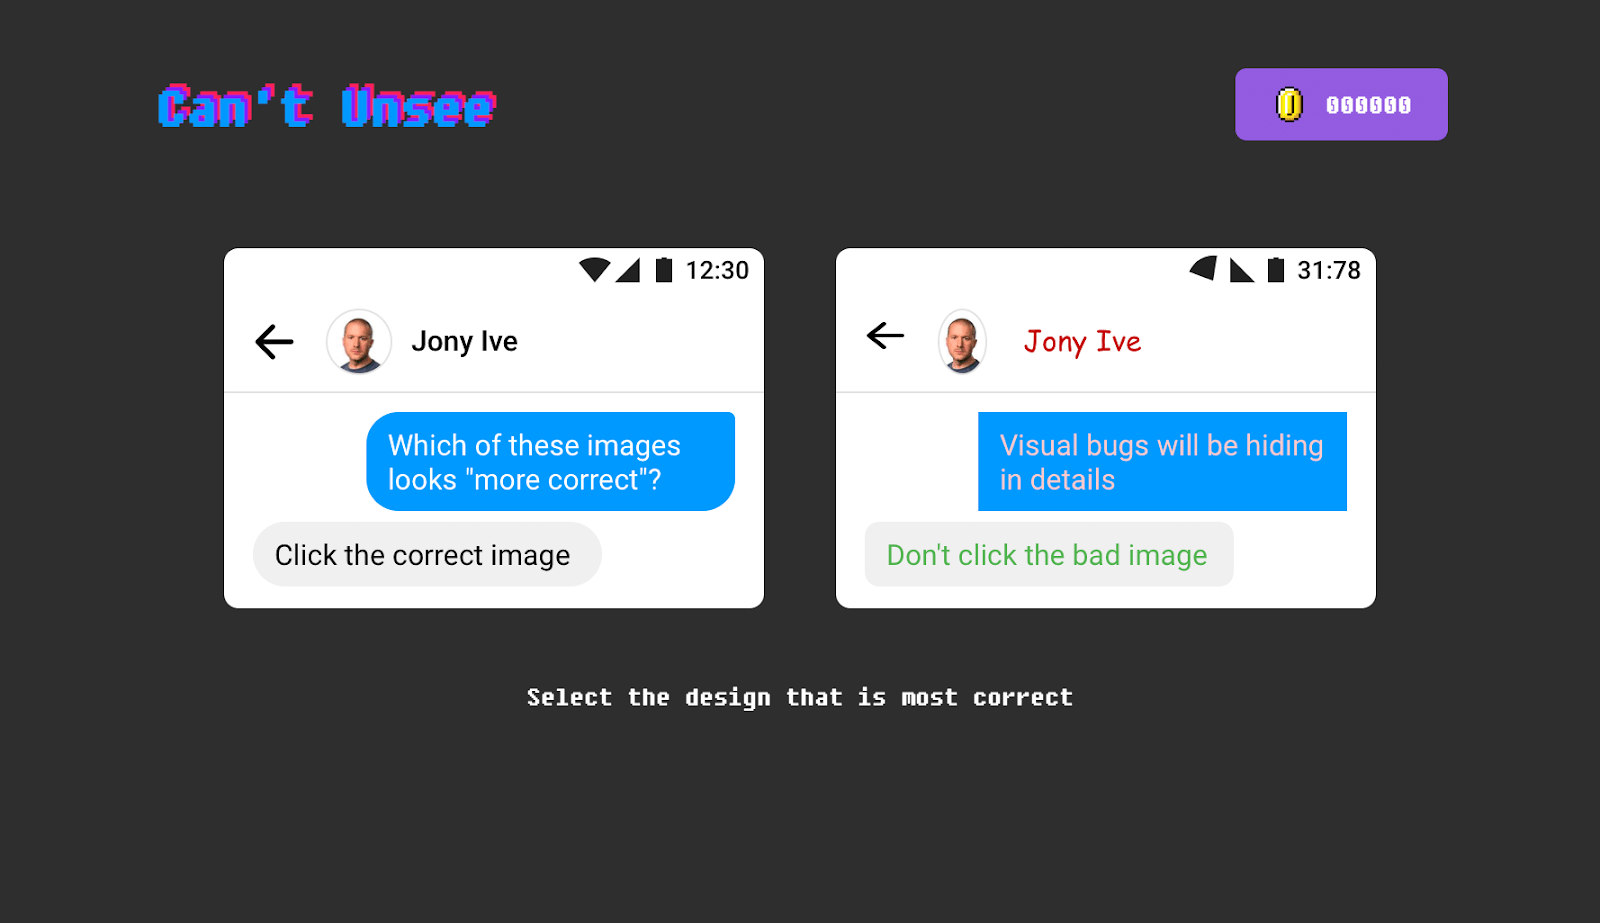 The game Can’t Unsee asks participants which of two designs is more correct from a UI perspective.